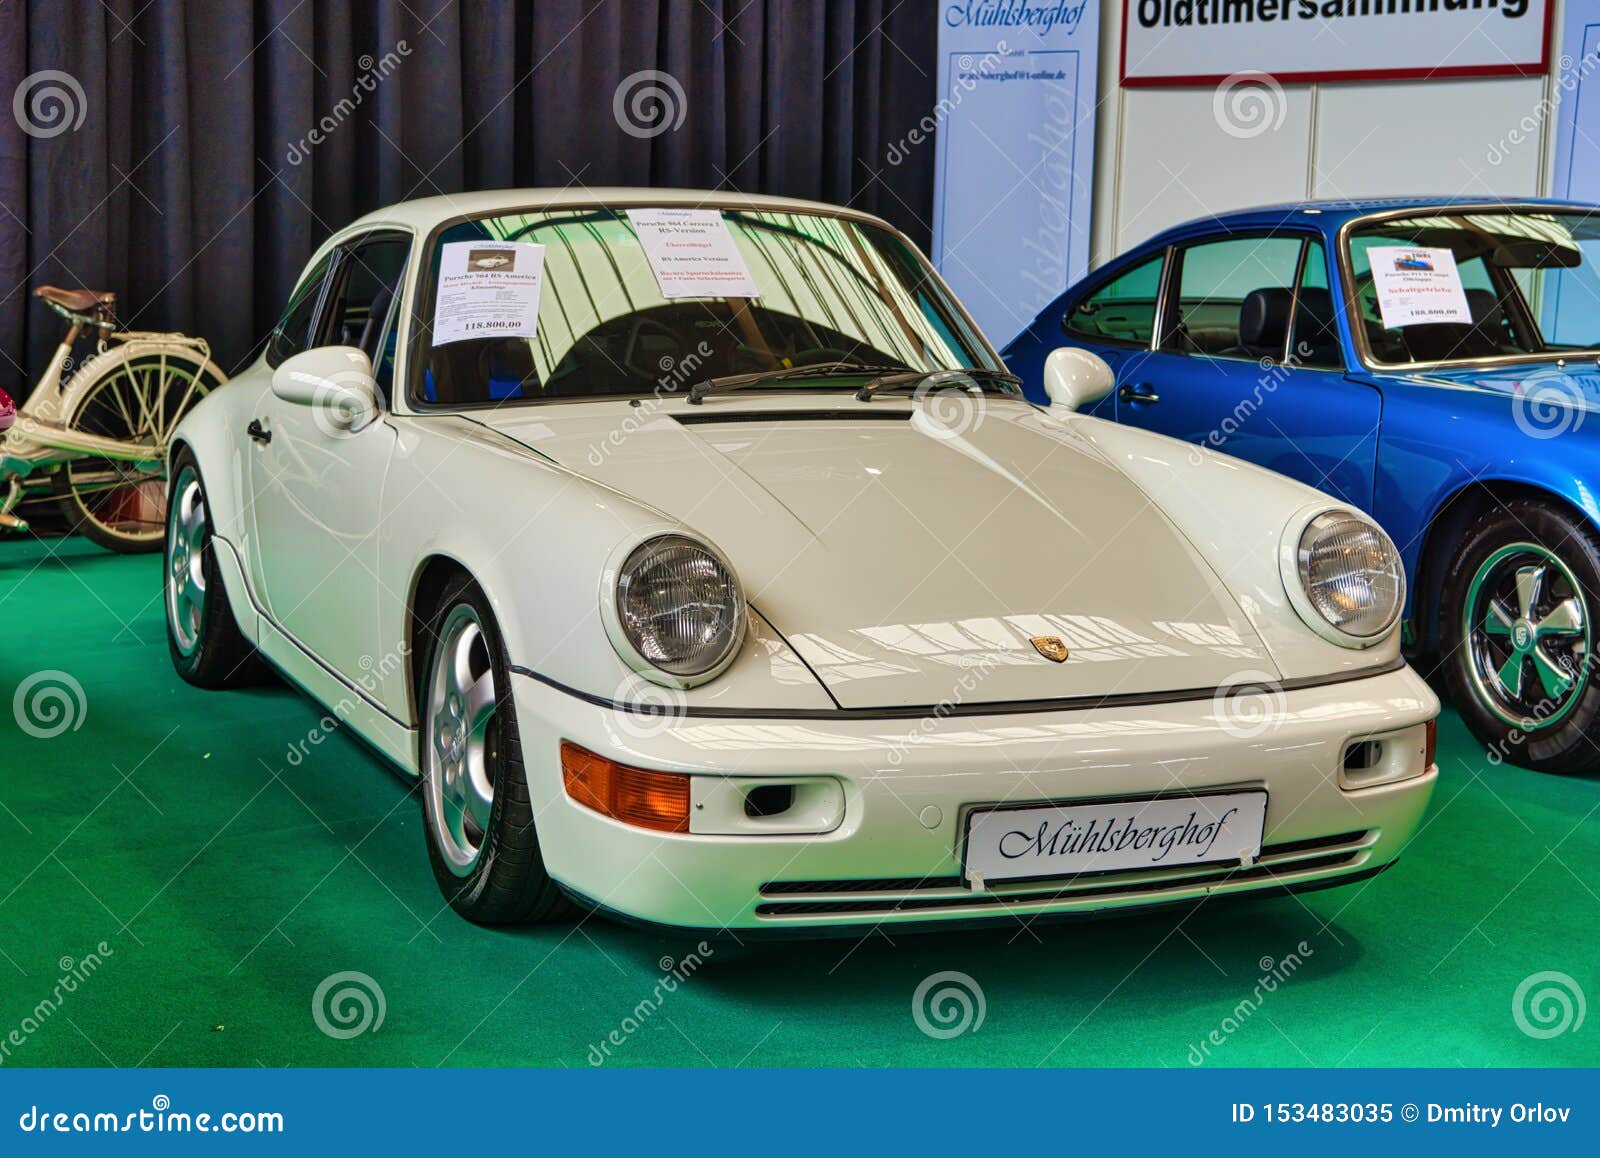 FRIEDRICHSHAFEN - MAY 2019: White PORSCHE 911 964 CARRERA 2 RS 1993 Coupe  at Motorworld Classics Bodensee on May 11, 2019 in Editorial Image - Image  of traffic, modern: 153483035